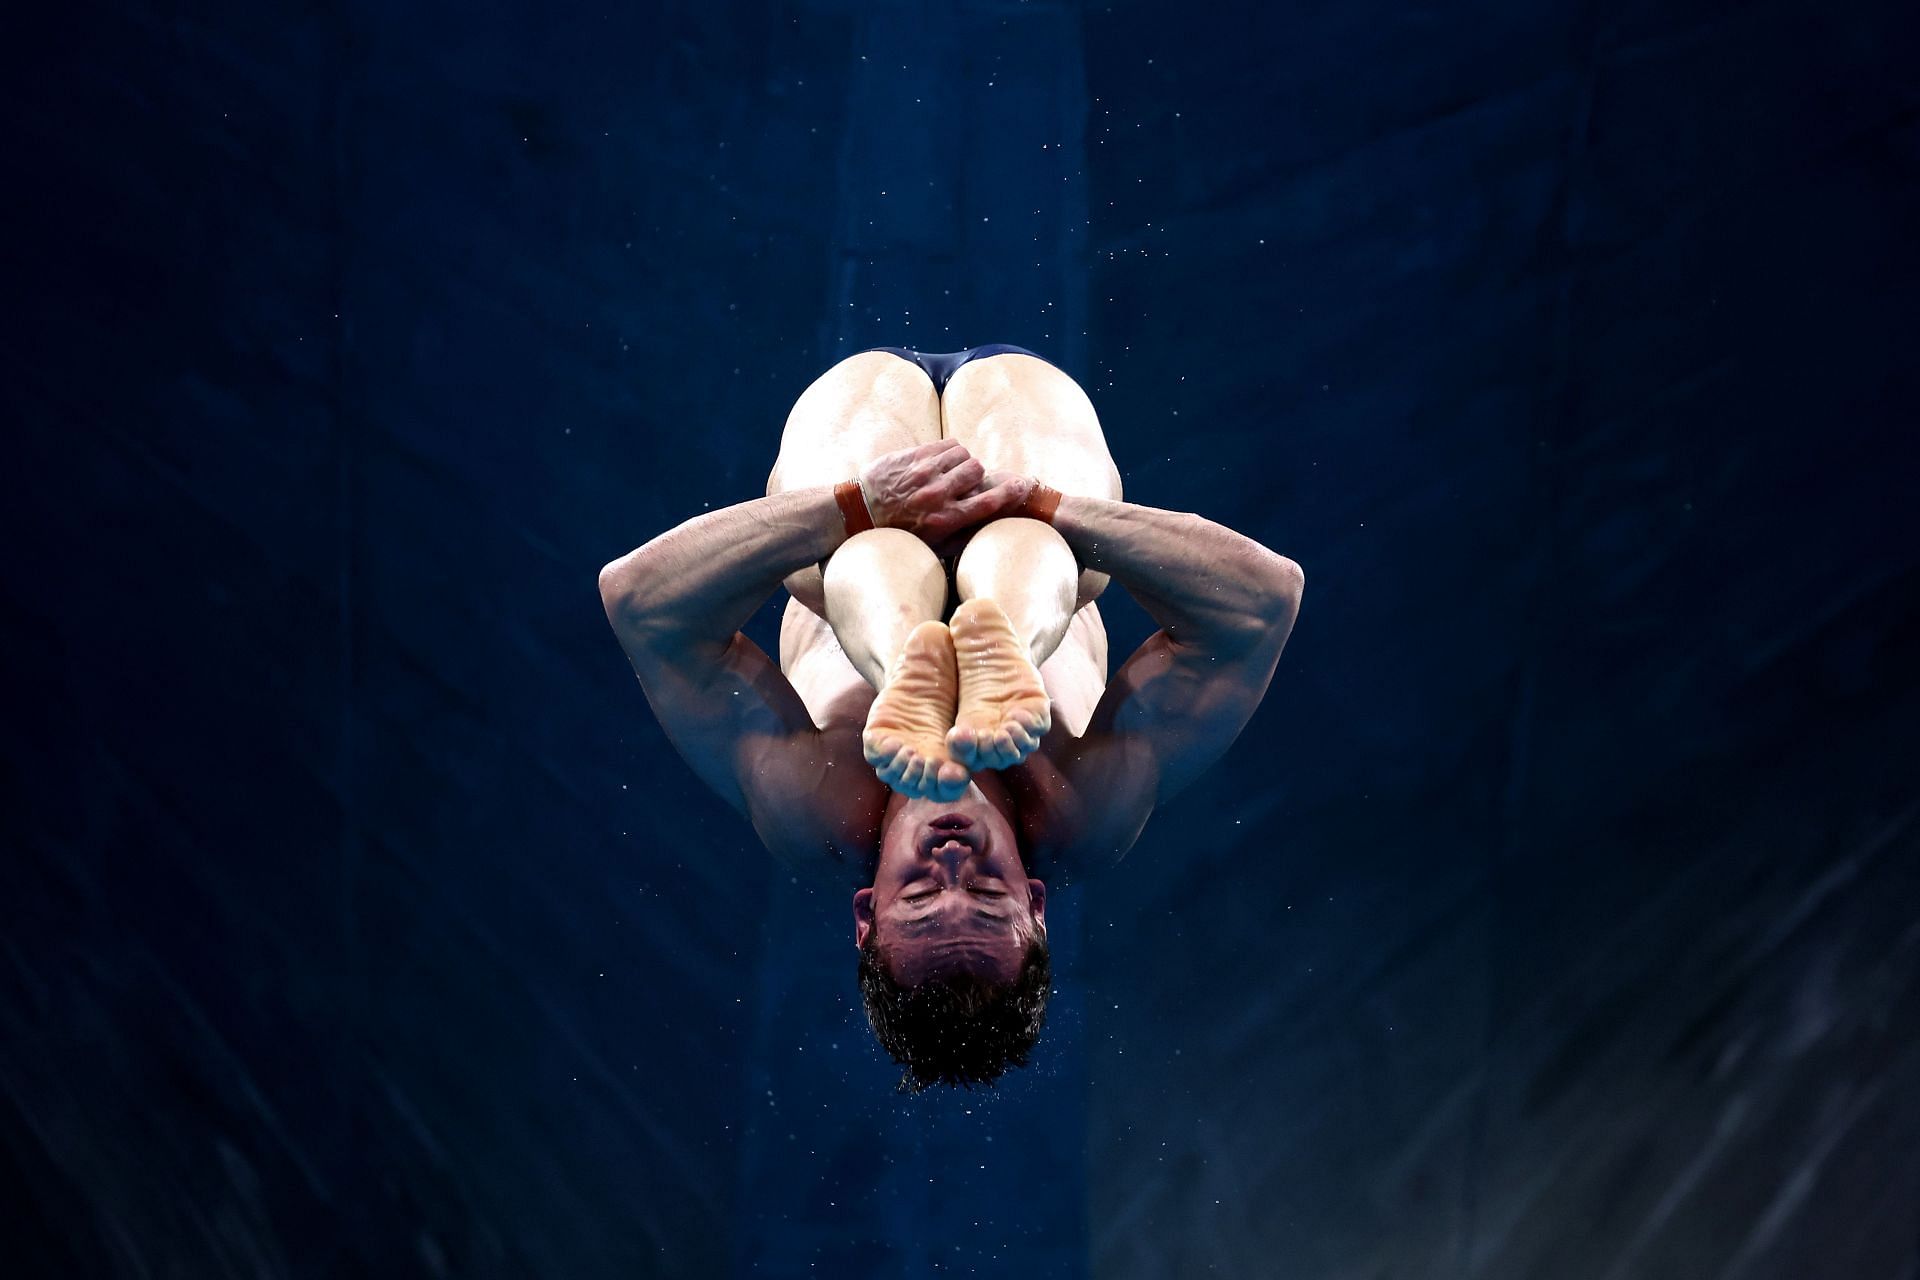 tom daley diving olympics 2022